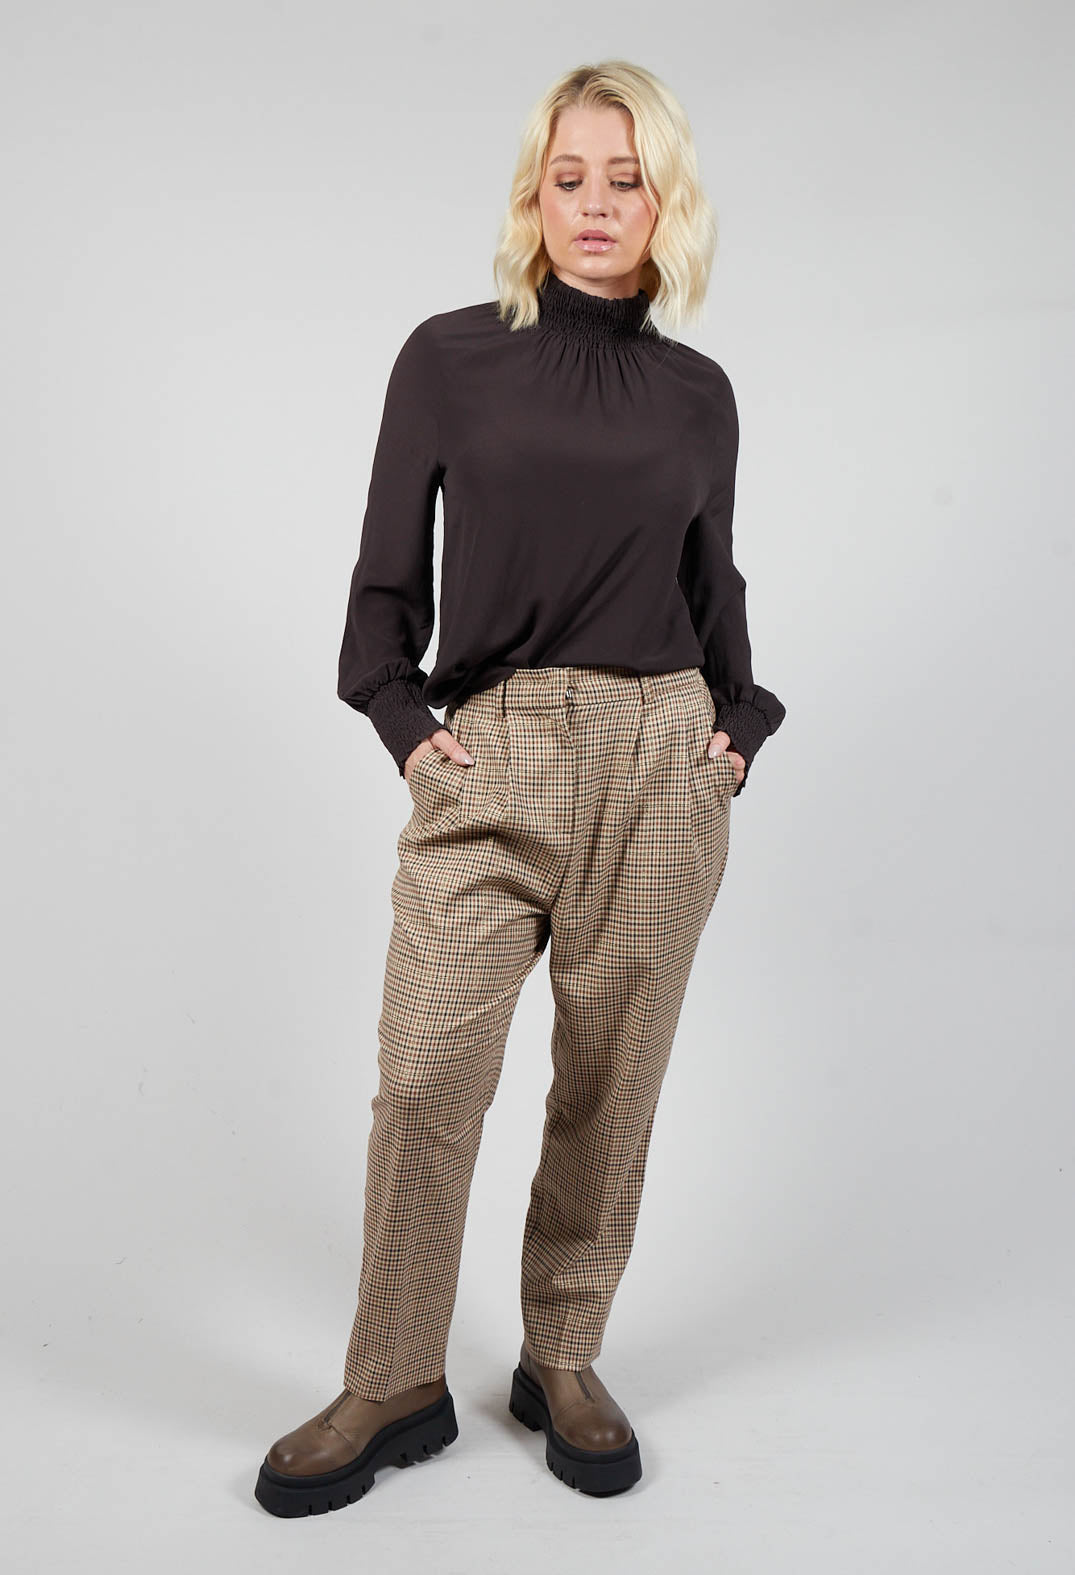 Tailored Dogtooth Trousers in Beige